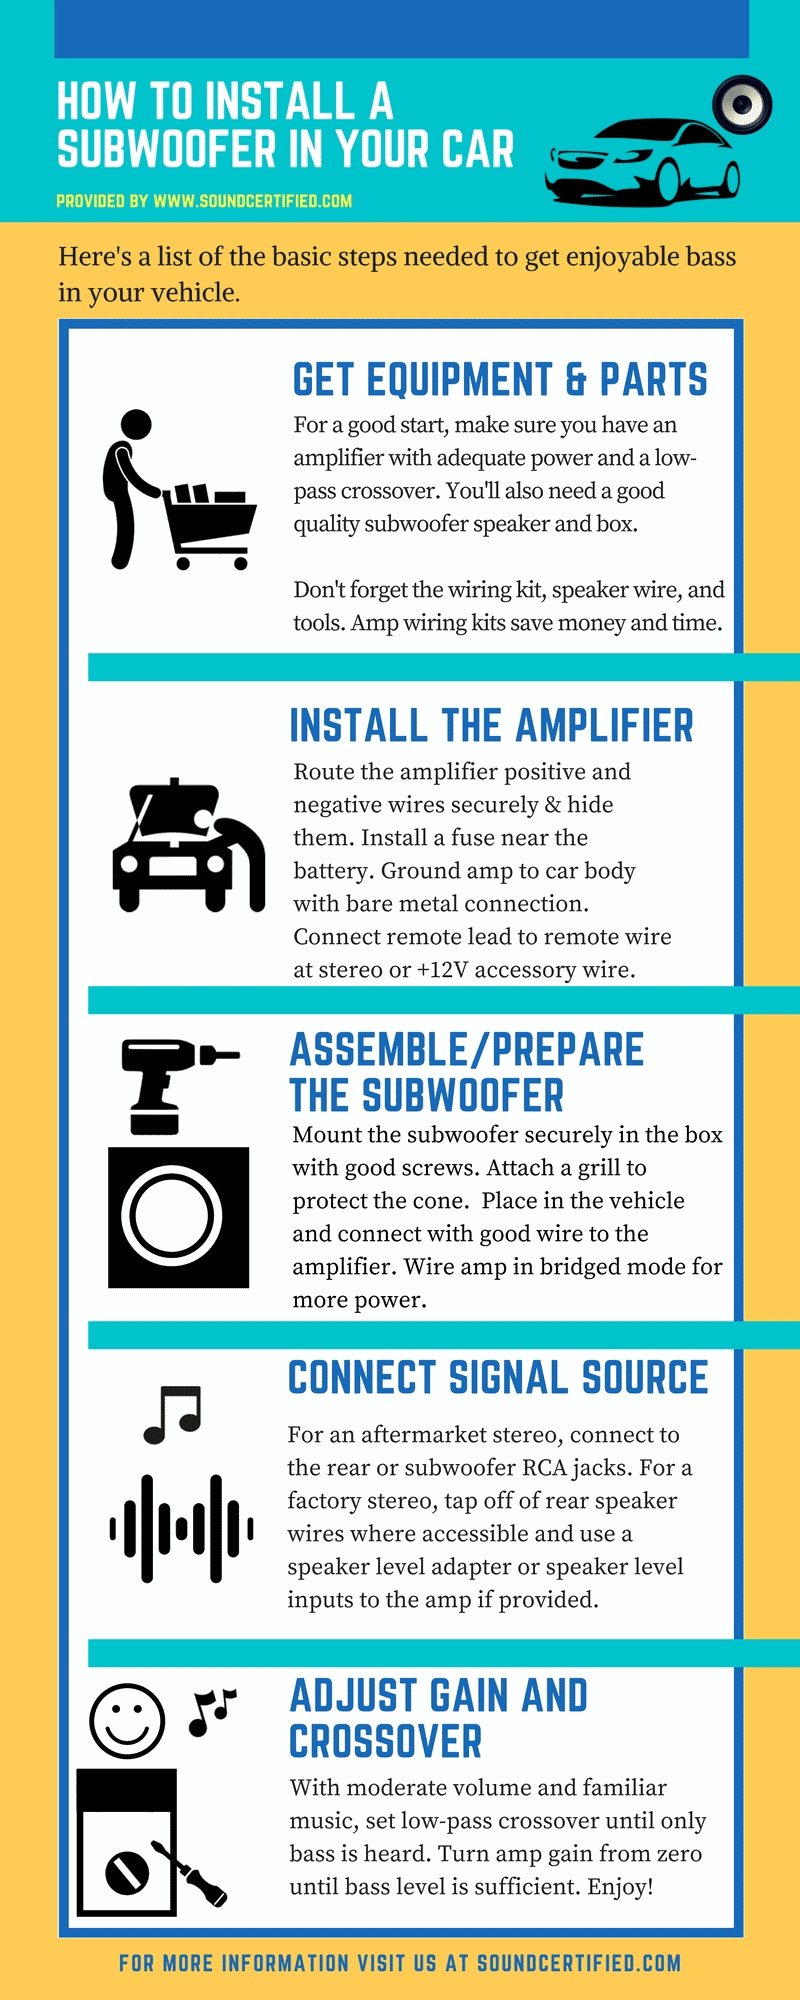 Infographic for how to install a subwoofer in your car